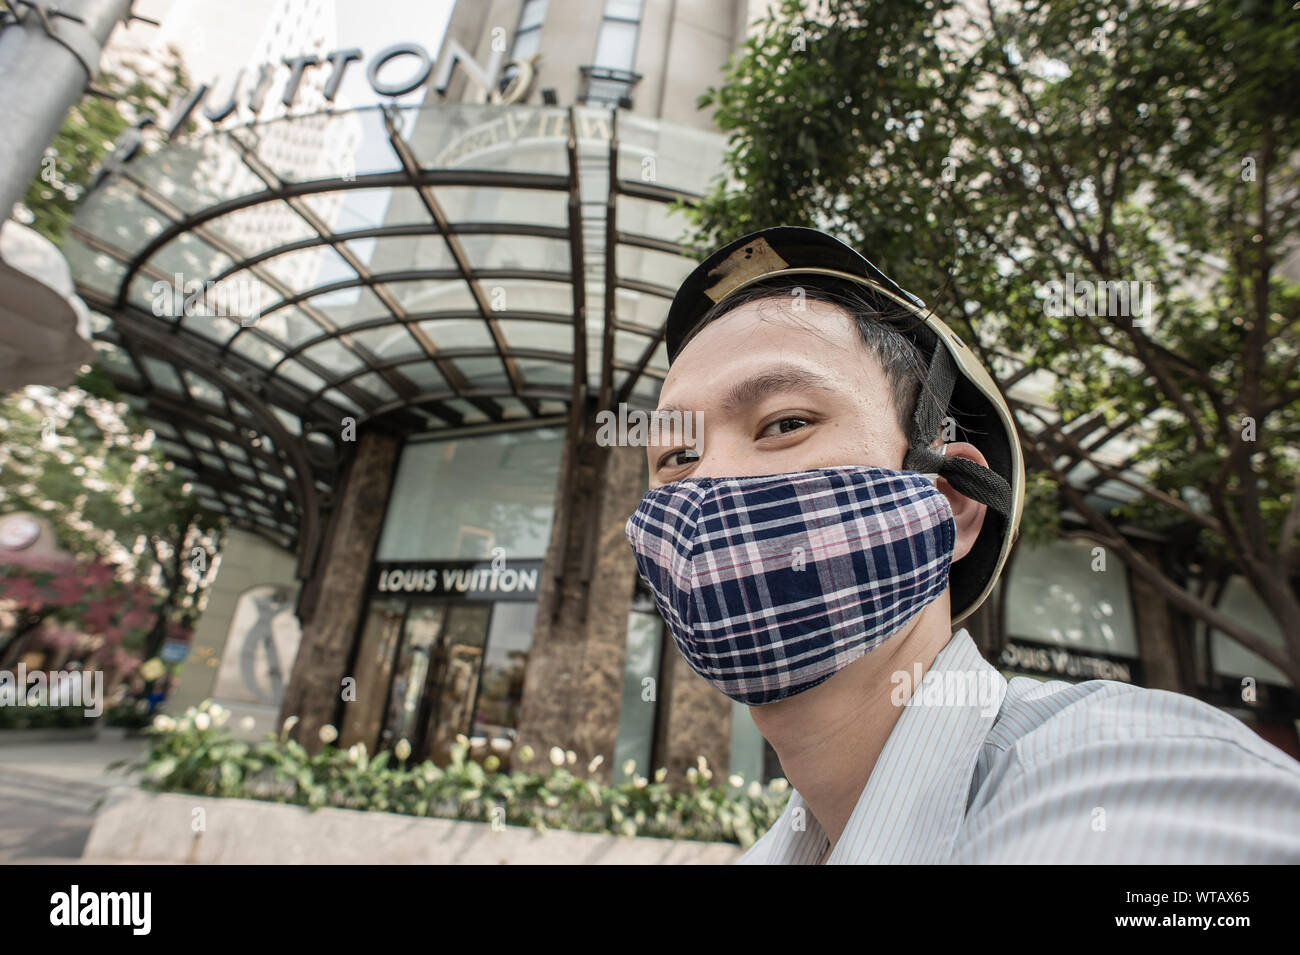 Motorcycle rider using anti-pollution mask near brand  store Stock Photo